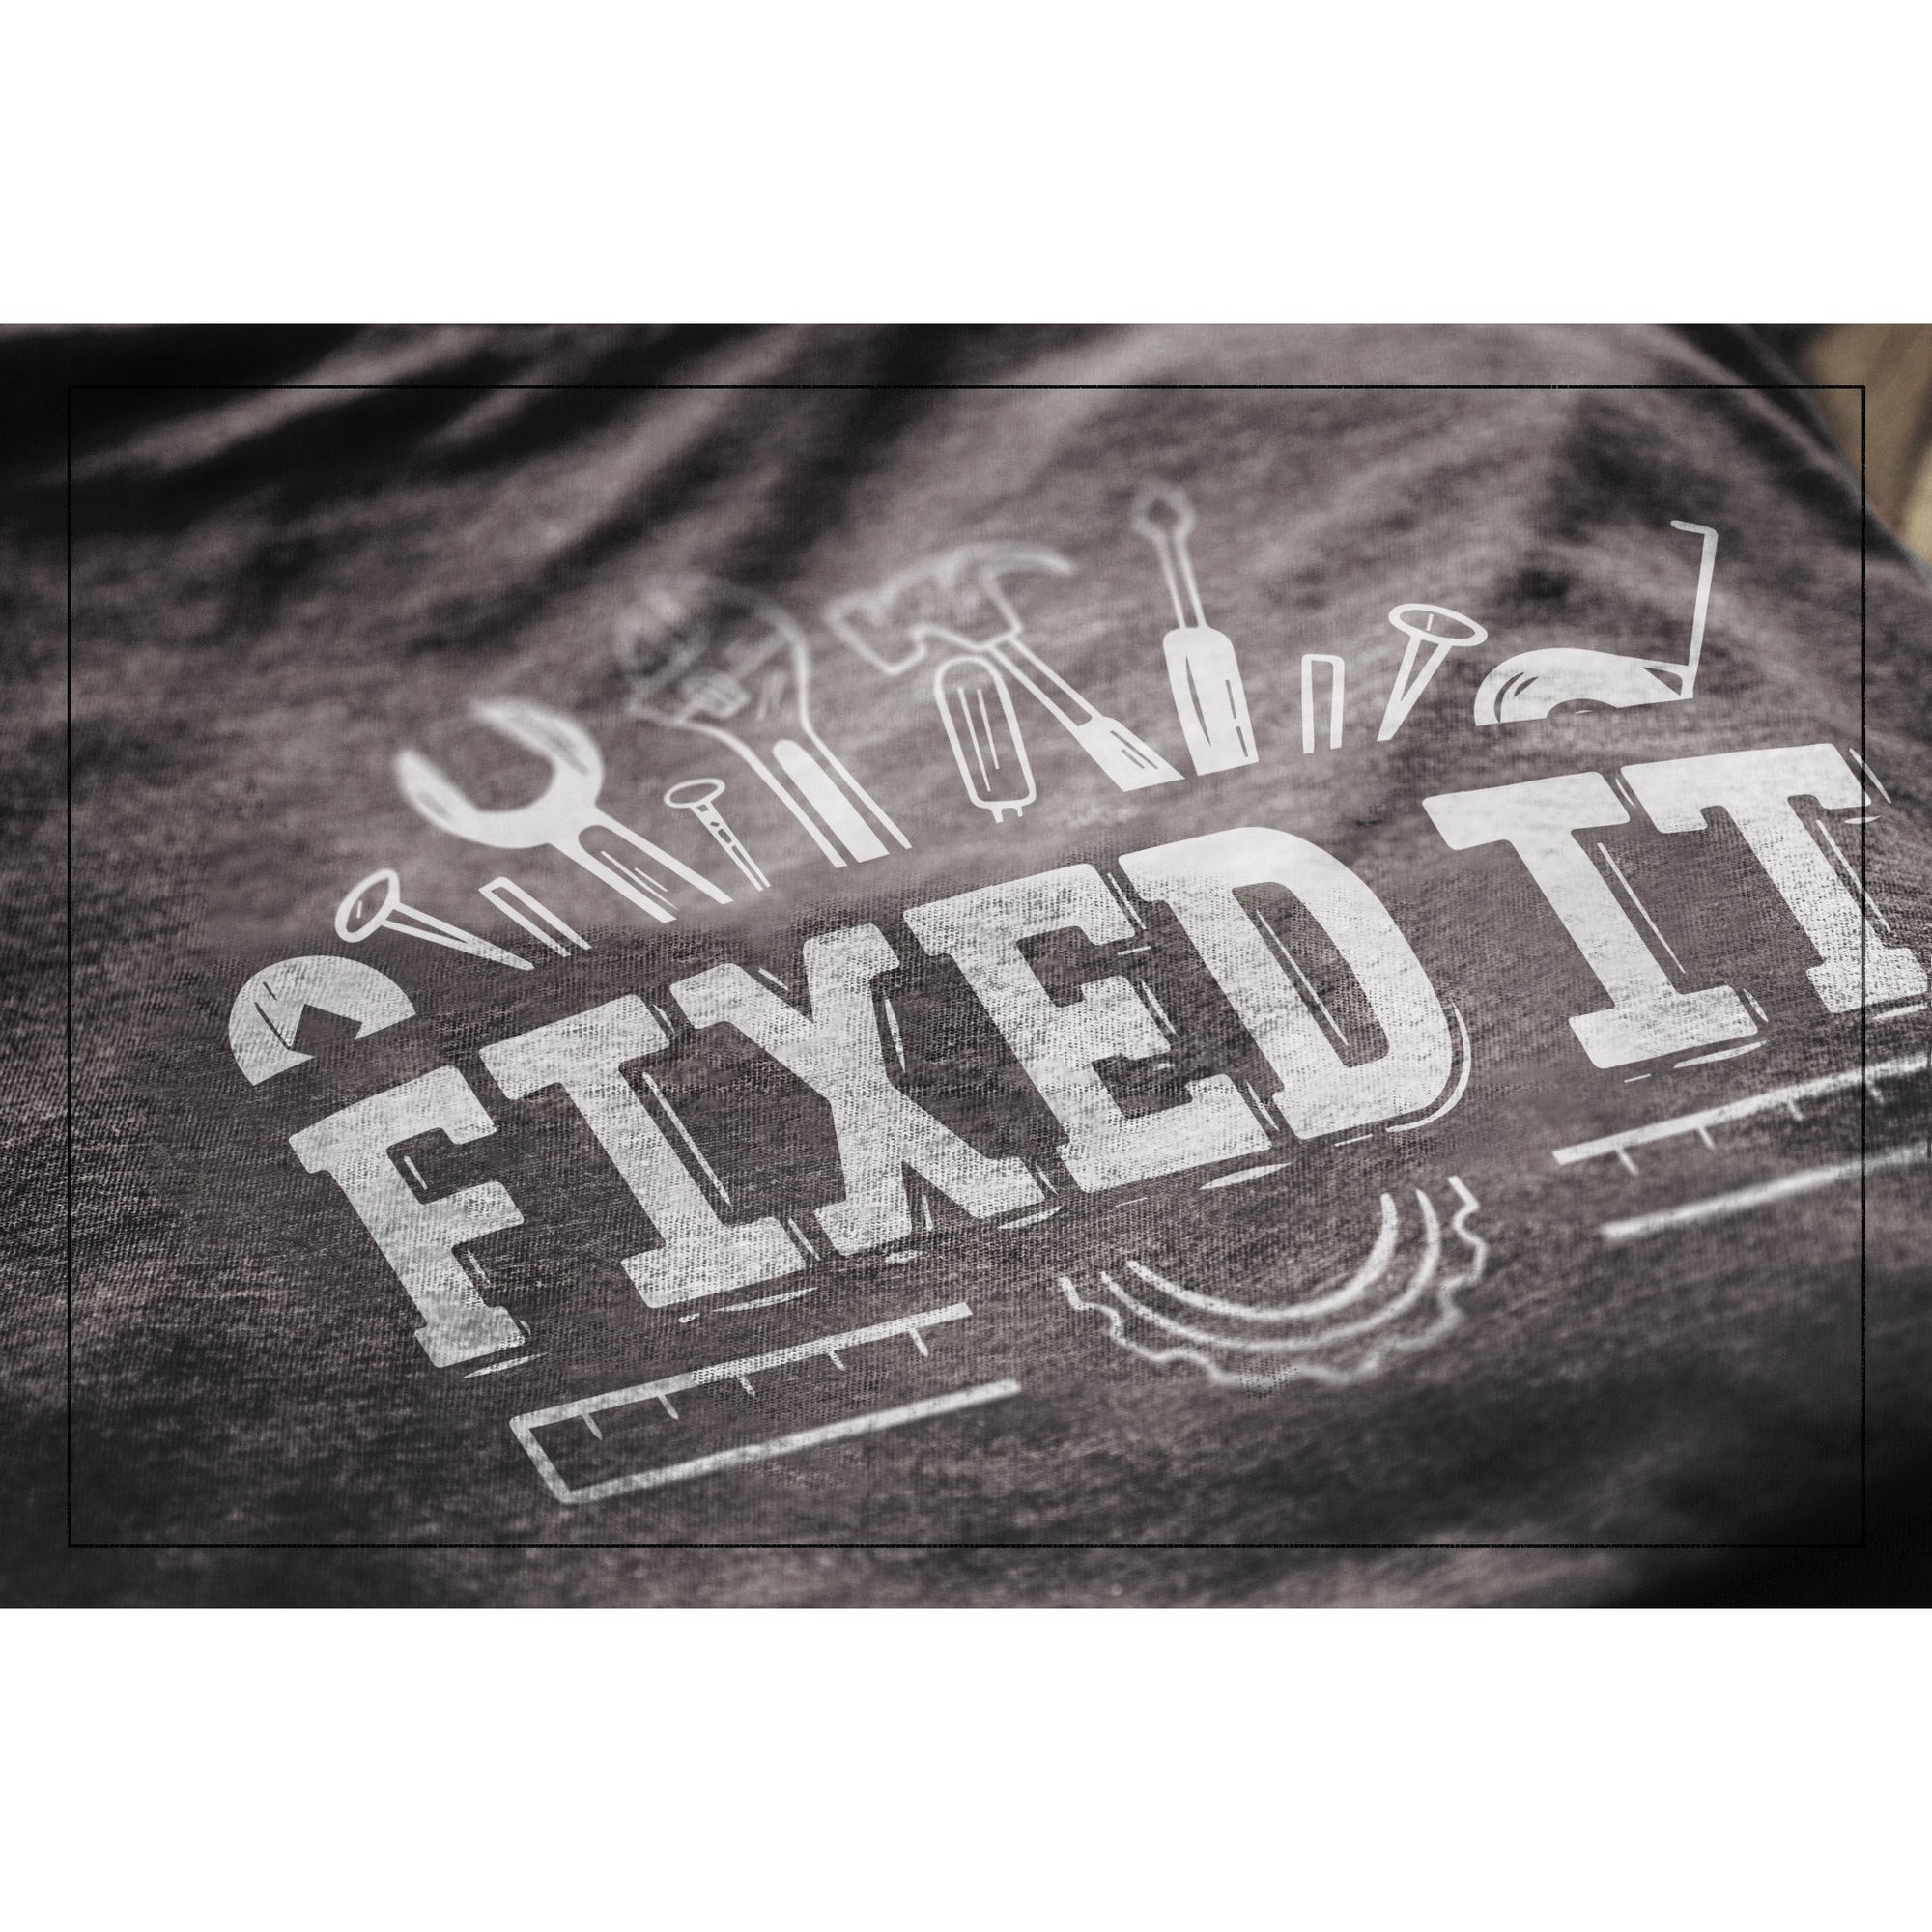 Fixed It Charcoal Printed Graphic Men's Crew T-Shirt Tee Closeup Details